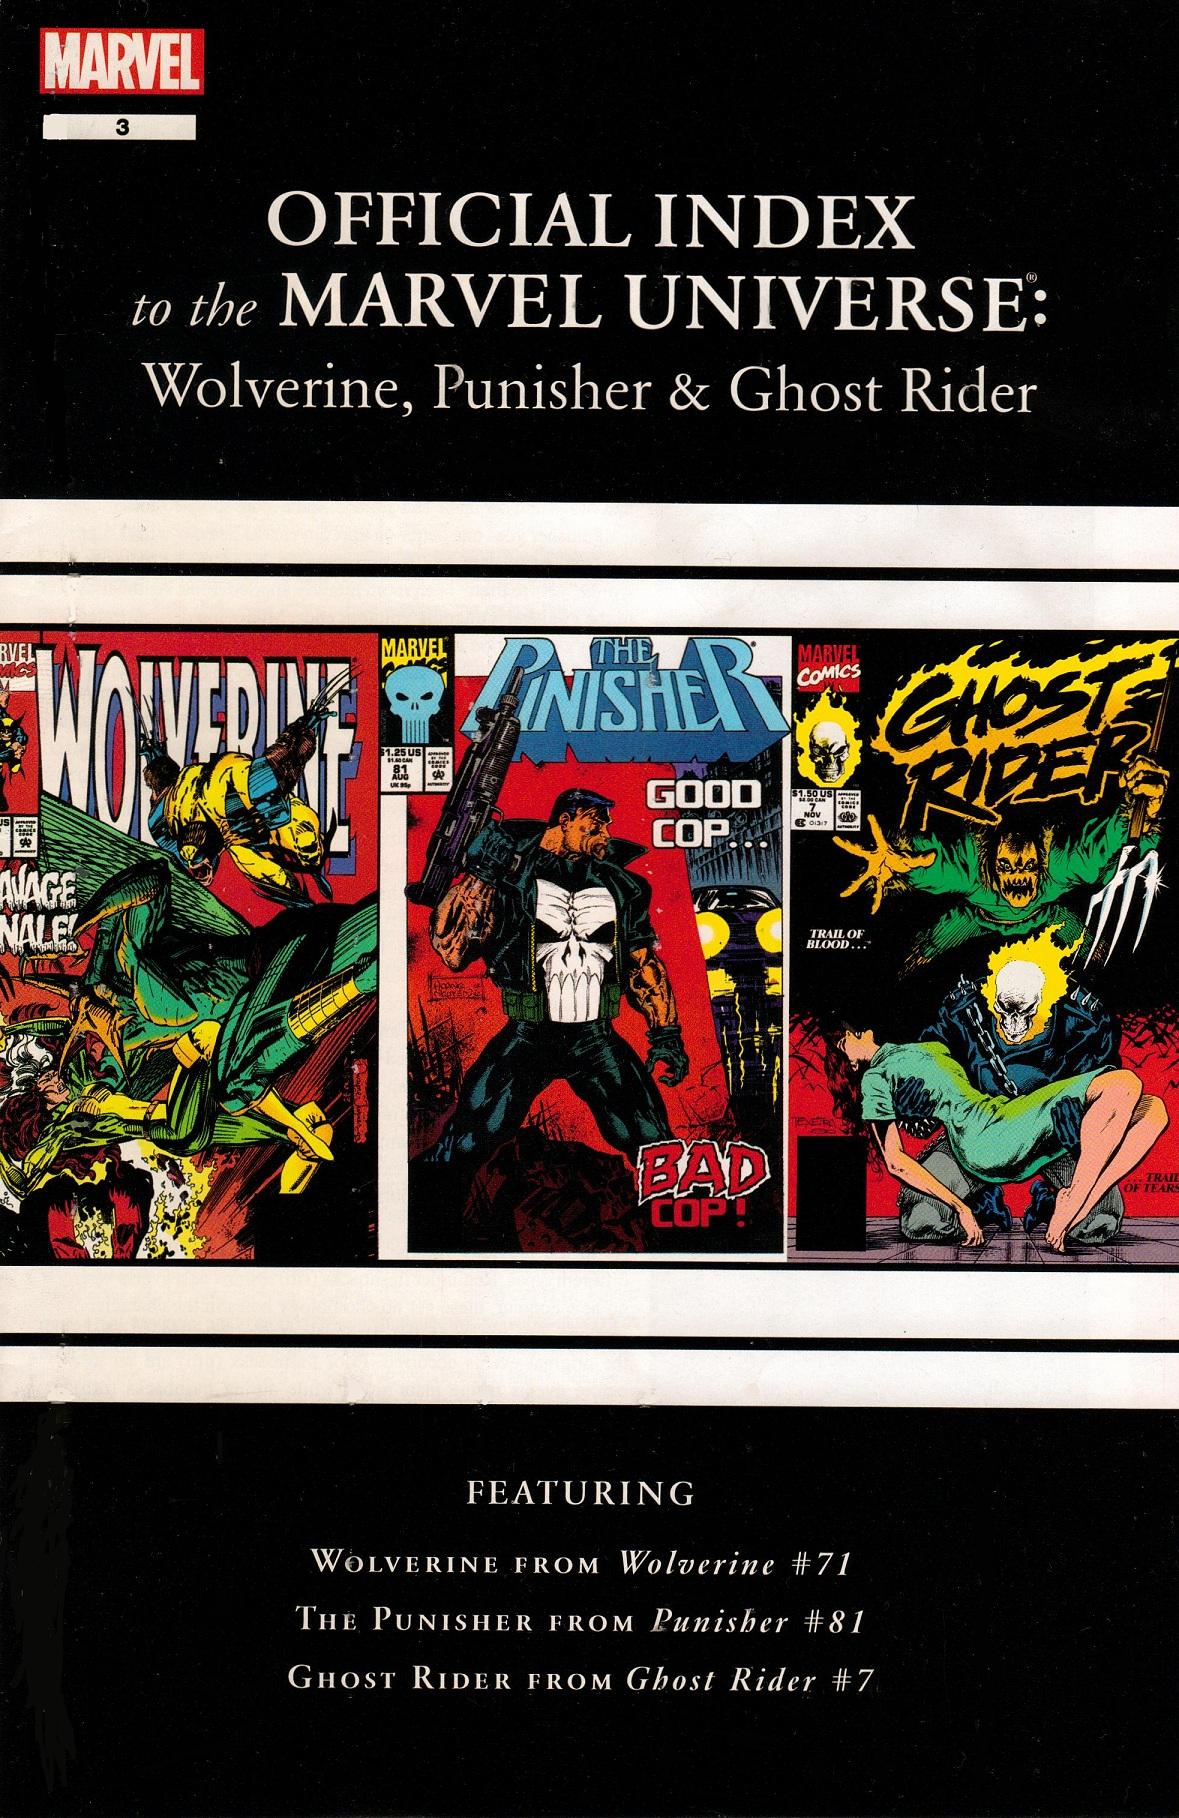 Wolverine, Punisher & Ghost Rider: Official Index to the Marvel Universe Vol. 1 #3